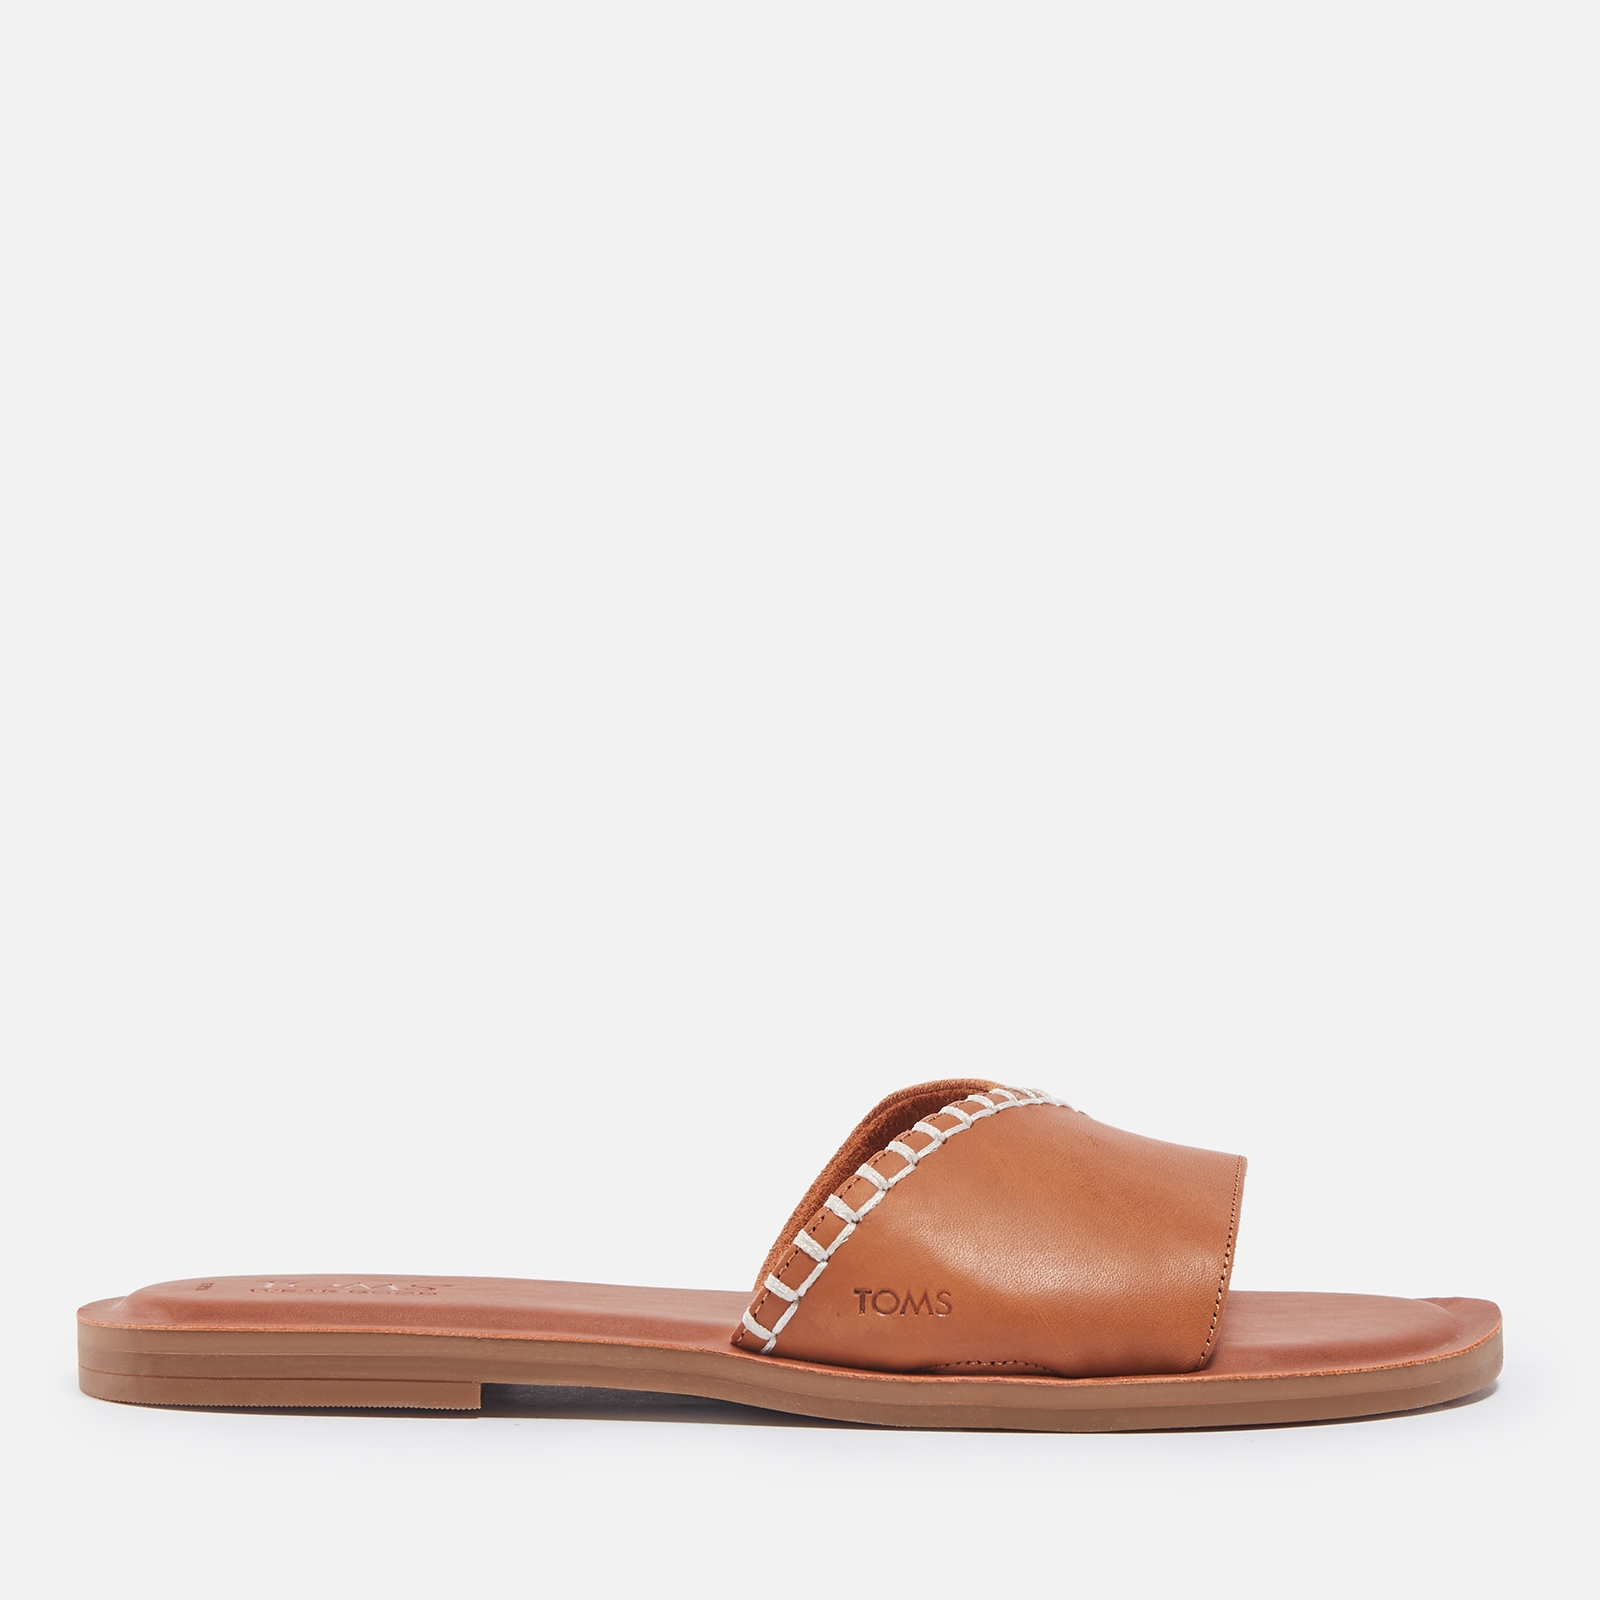 TOMS Women's Shea Leather and Suede Sandals - UK 4 von TOMS